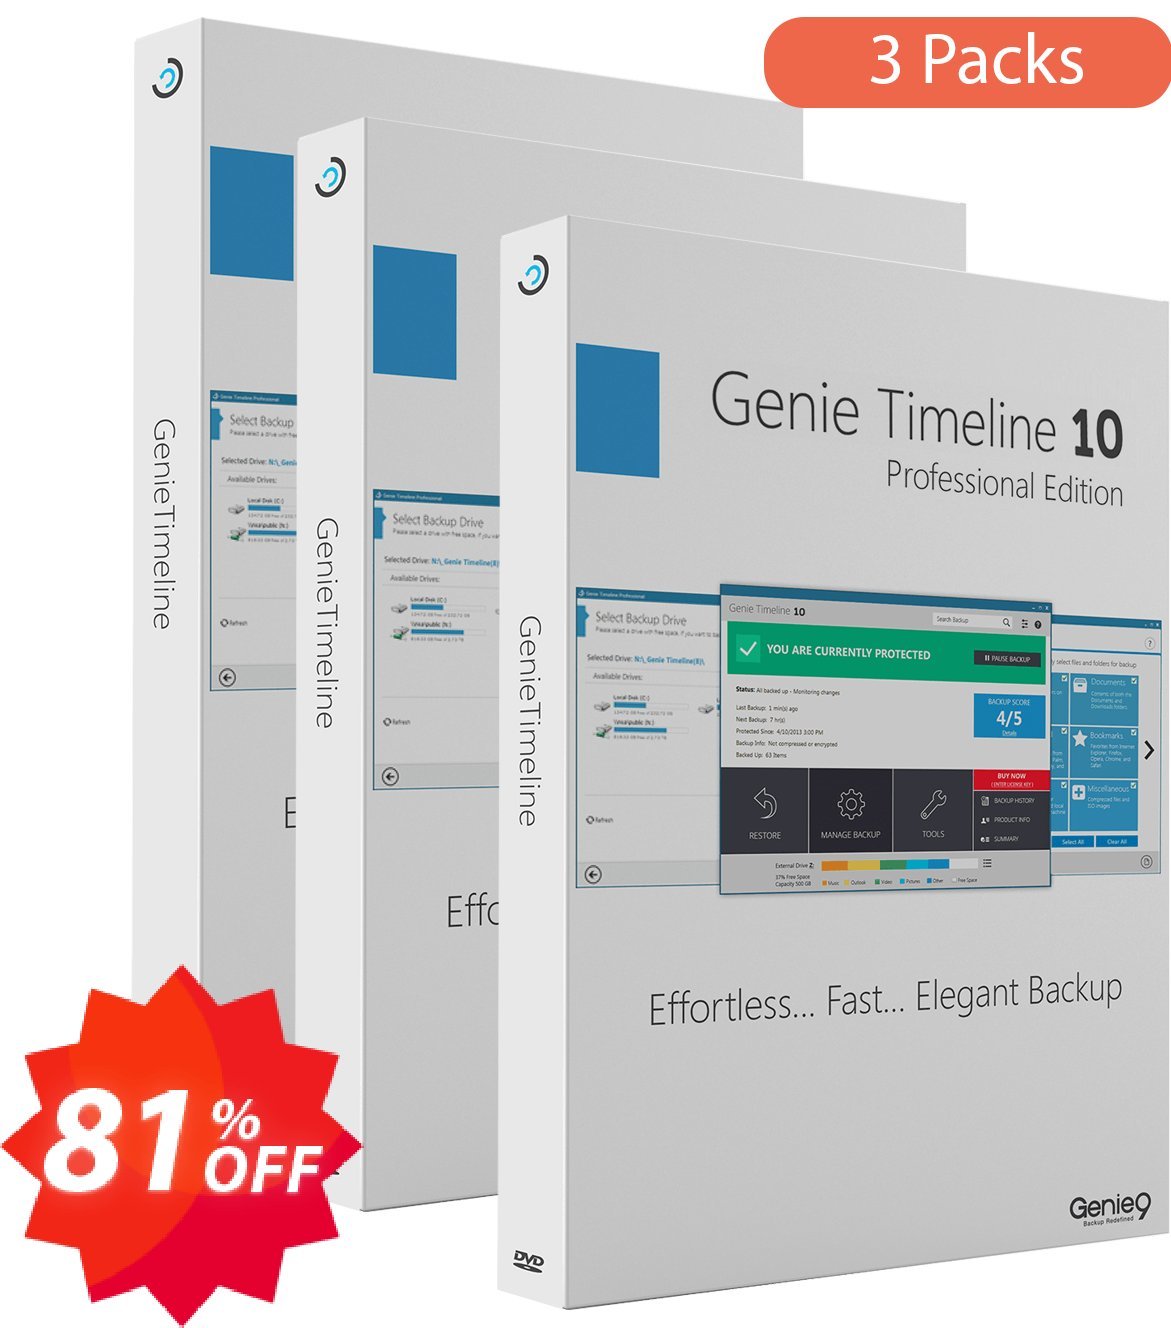 Genie Timeline Pro 10, 3 Pack  Coupon code 81% discount 